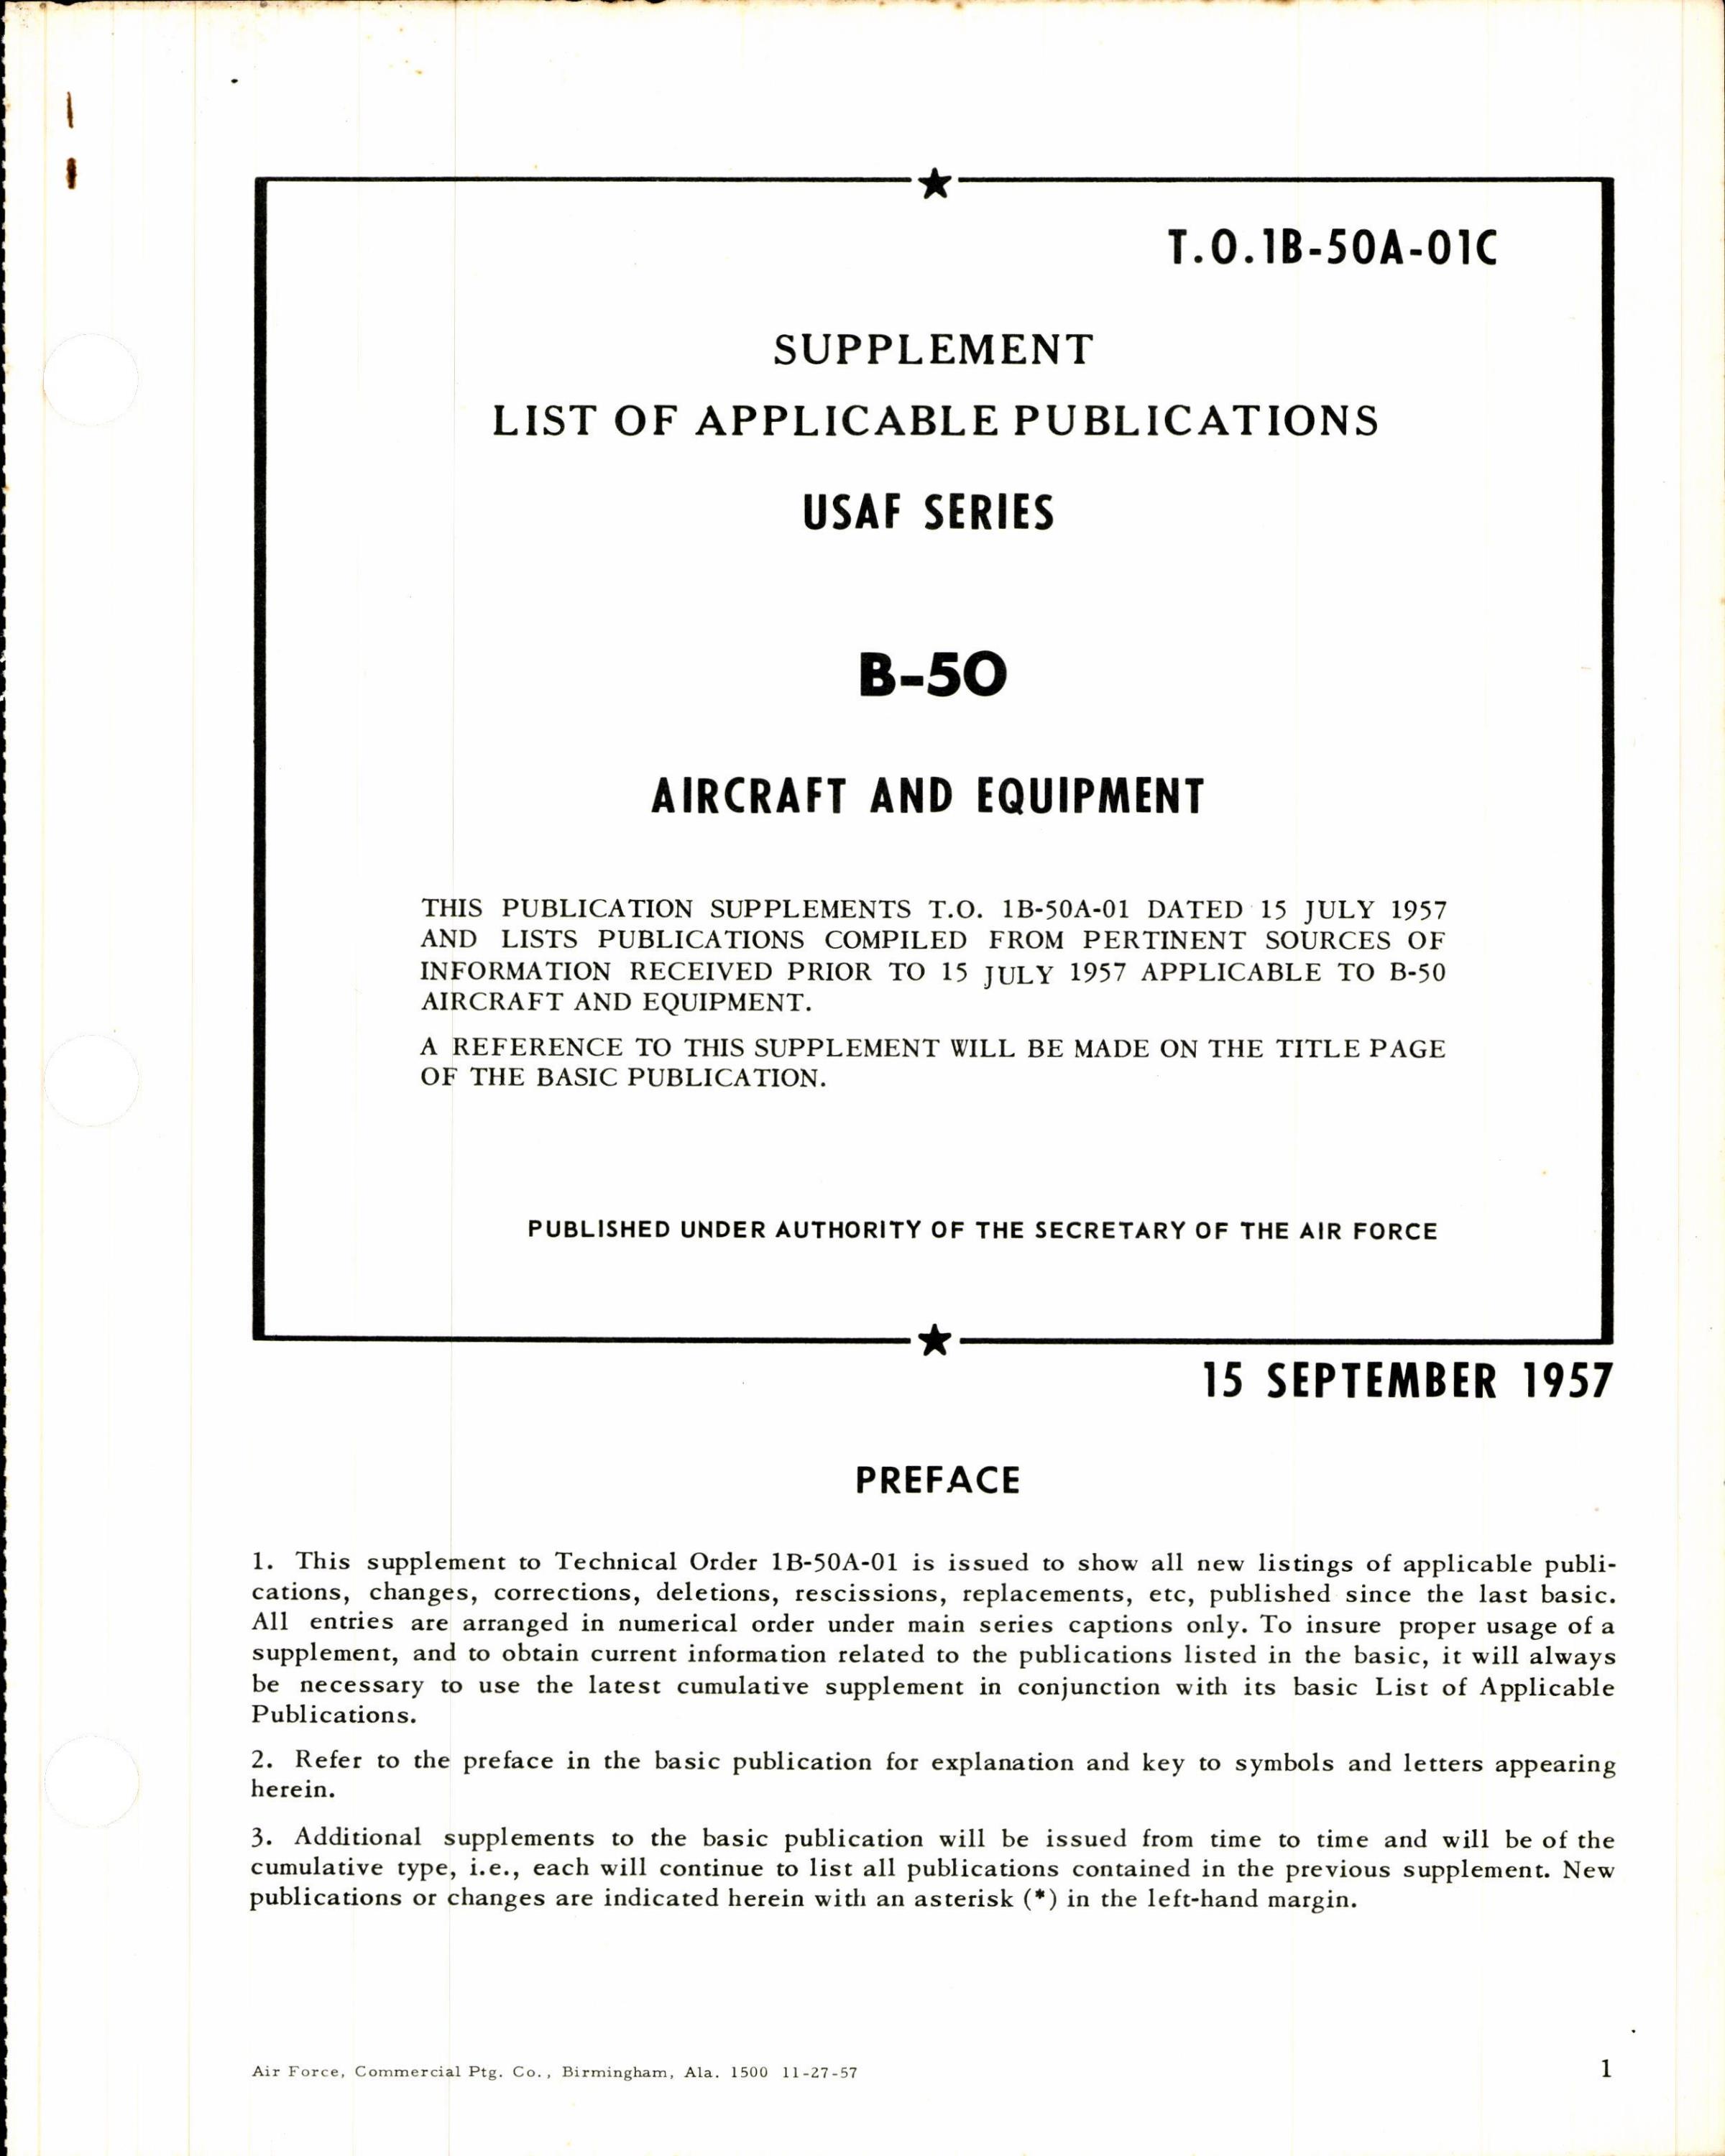 Sample page 1 from AirCorps Library document: Supplement List of Applicable Publications for B-50 Aircraft & Equipment